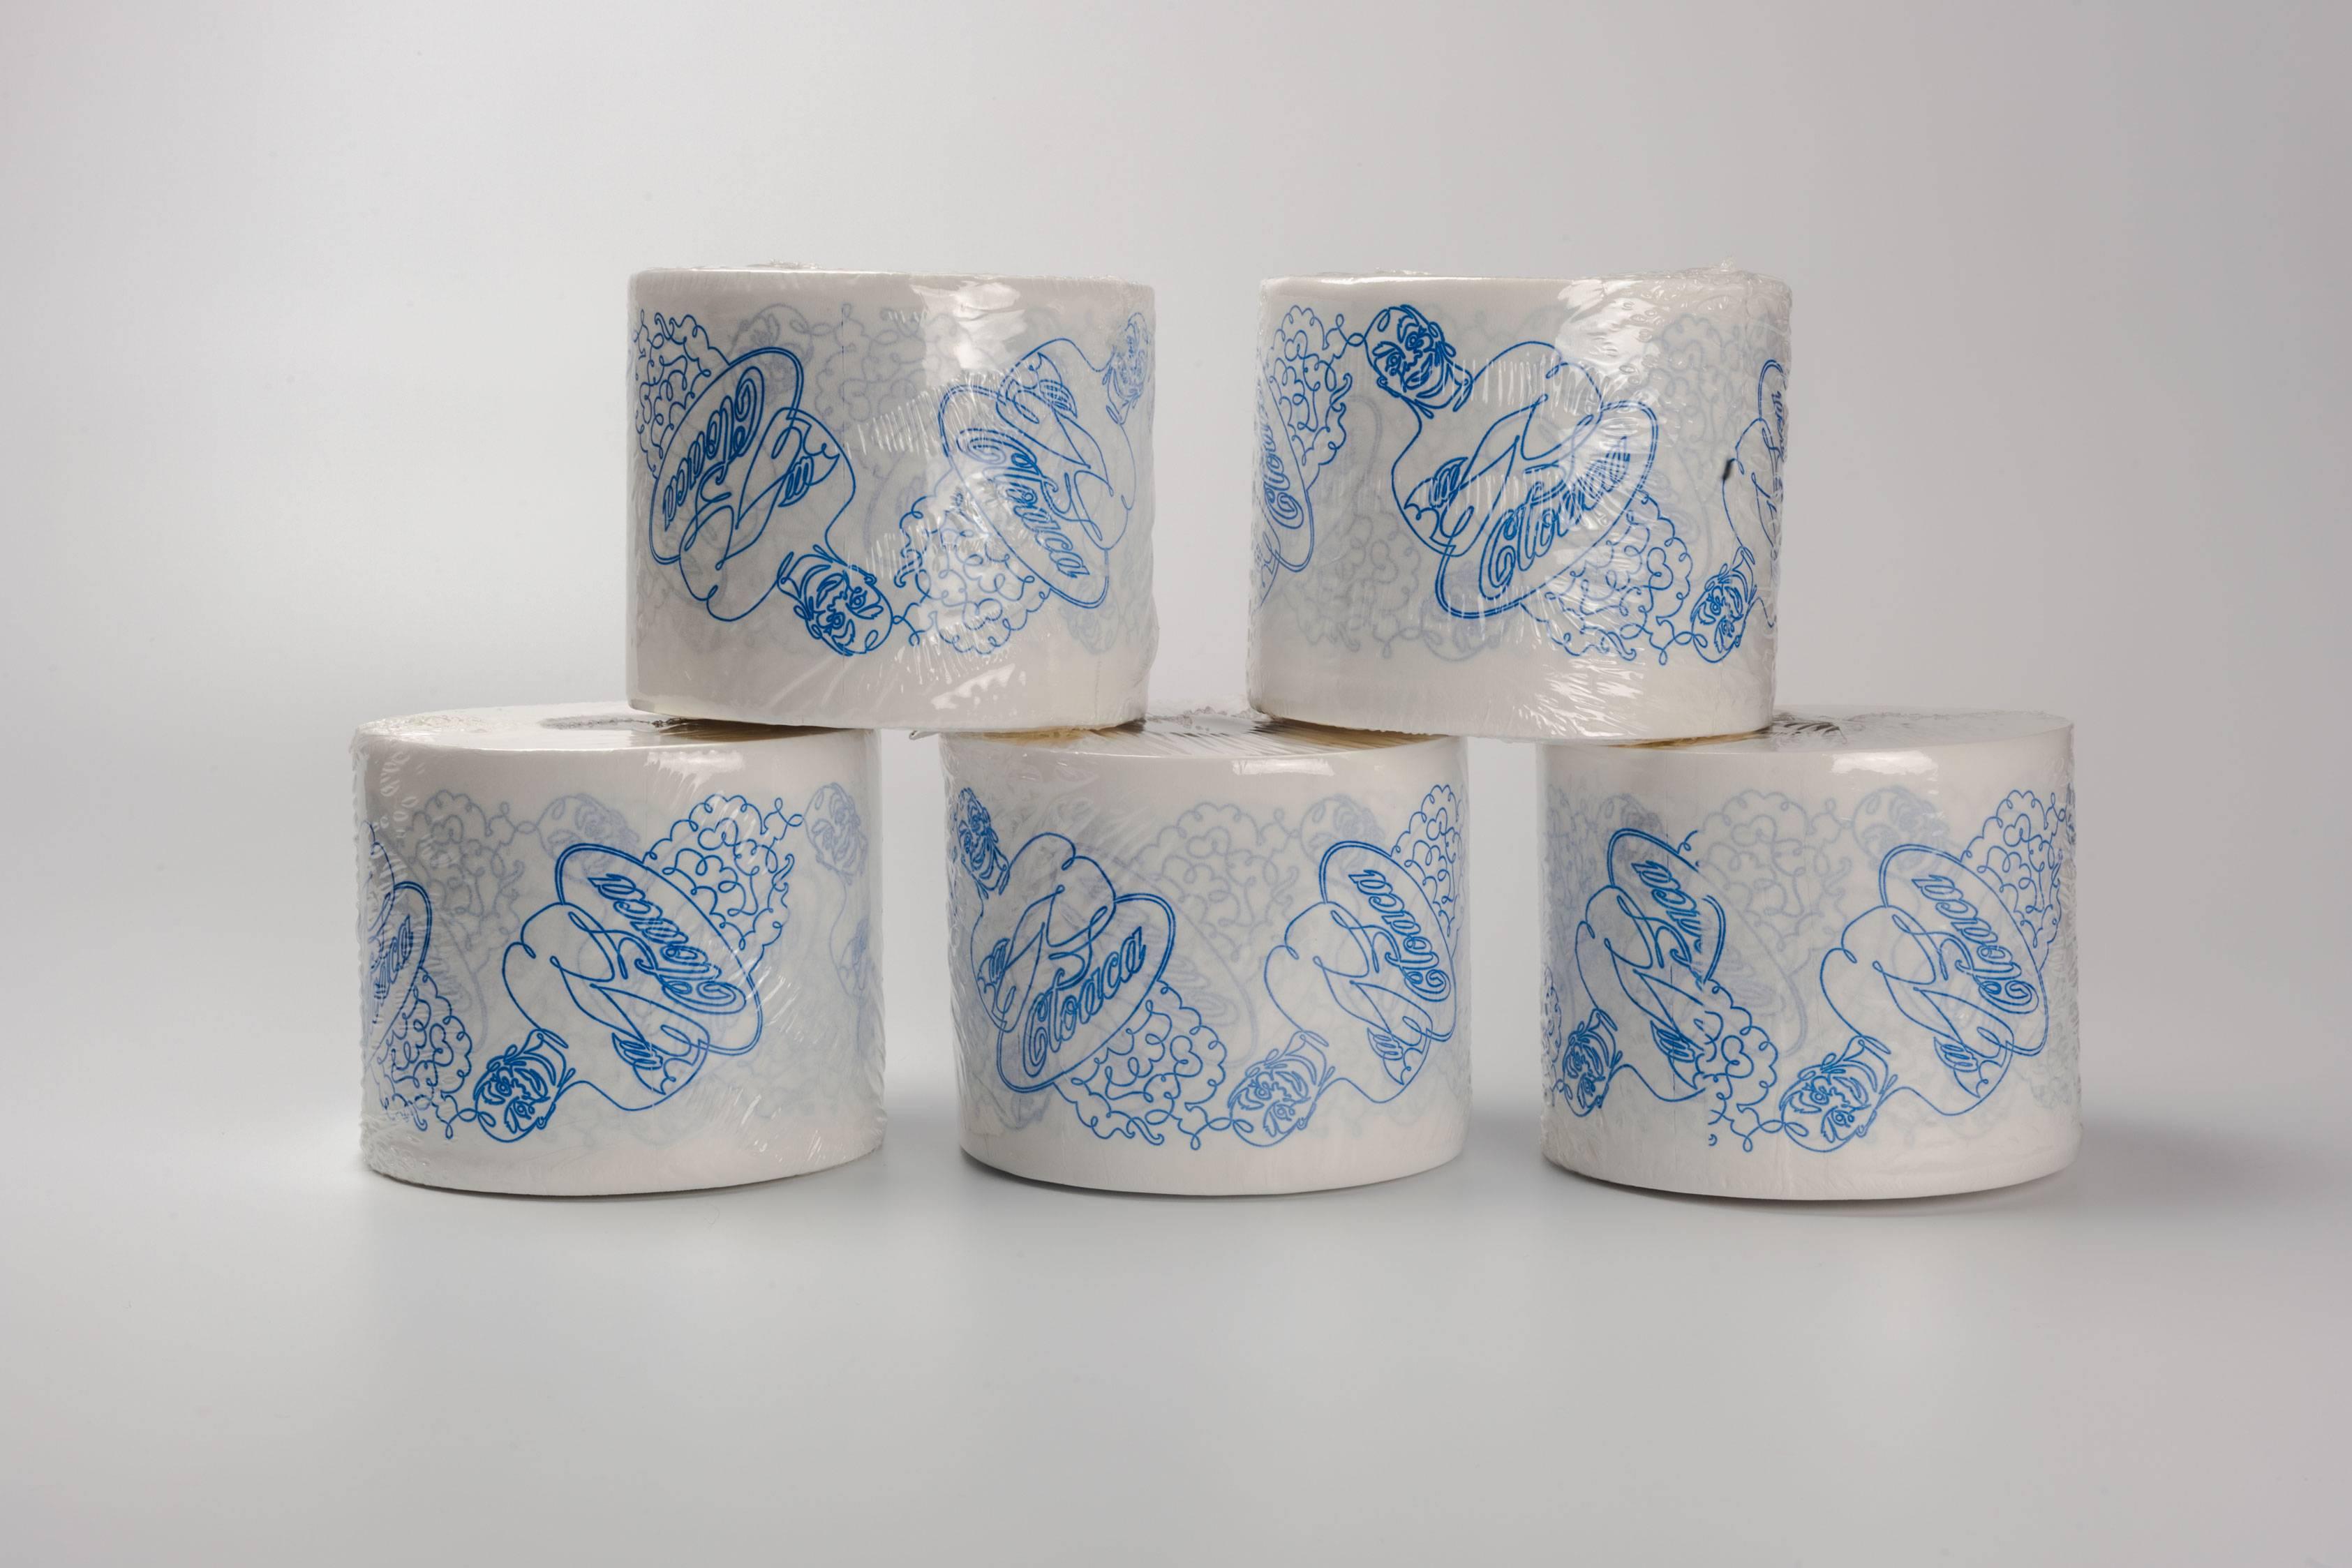 The Super Cloaca toilet paper rolls by Wim Delvoye were produced for the retrospective exhibition and world premiere of Super Cloaca at Mudam Luxembourg in 2007 and sold only during the exhibition at the Wim Shop. Rolls are white toilet paper with